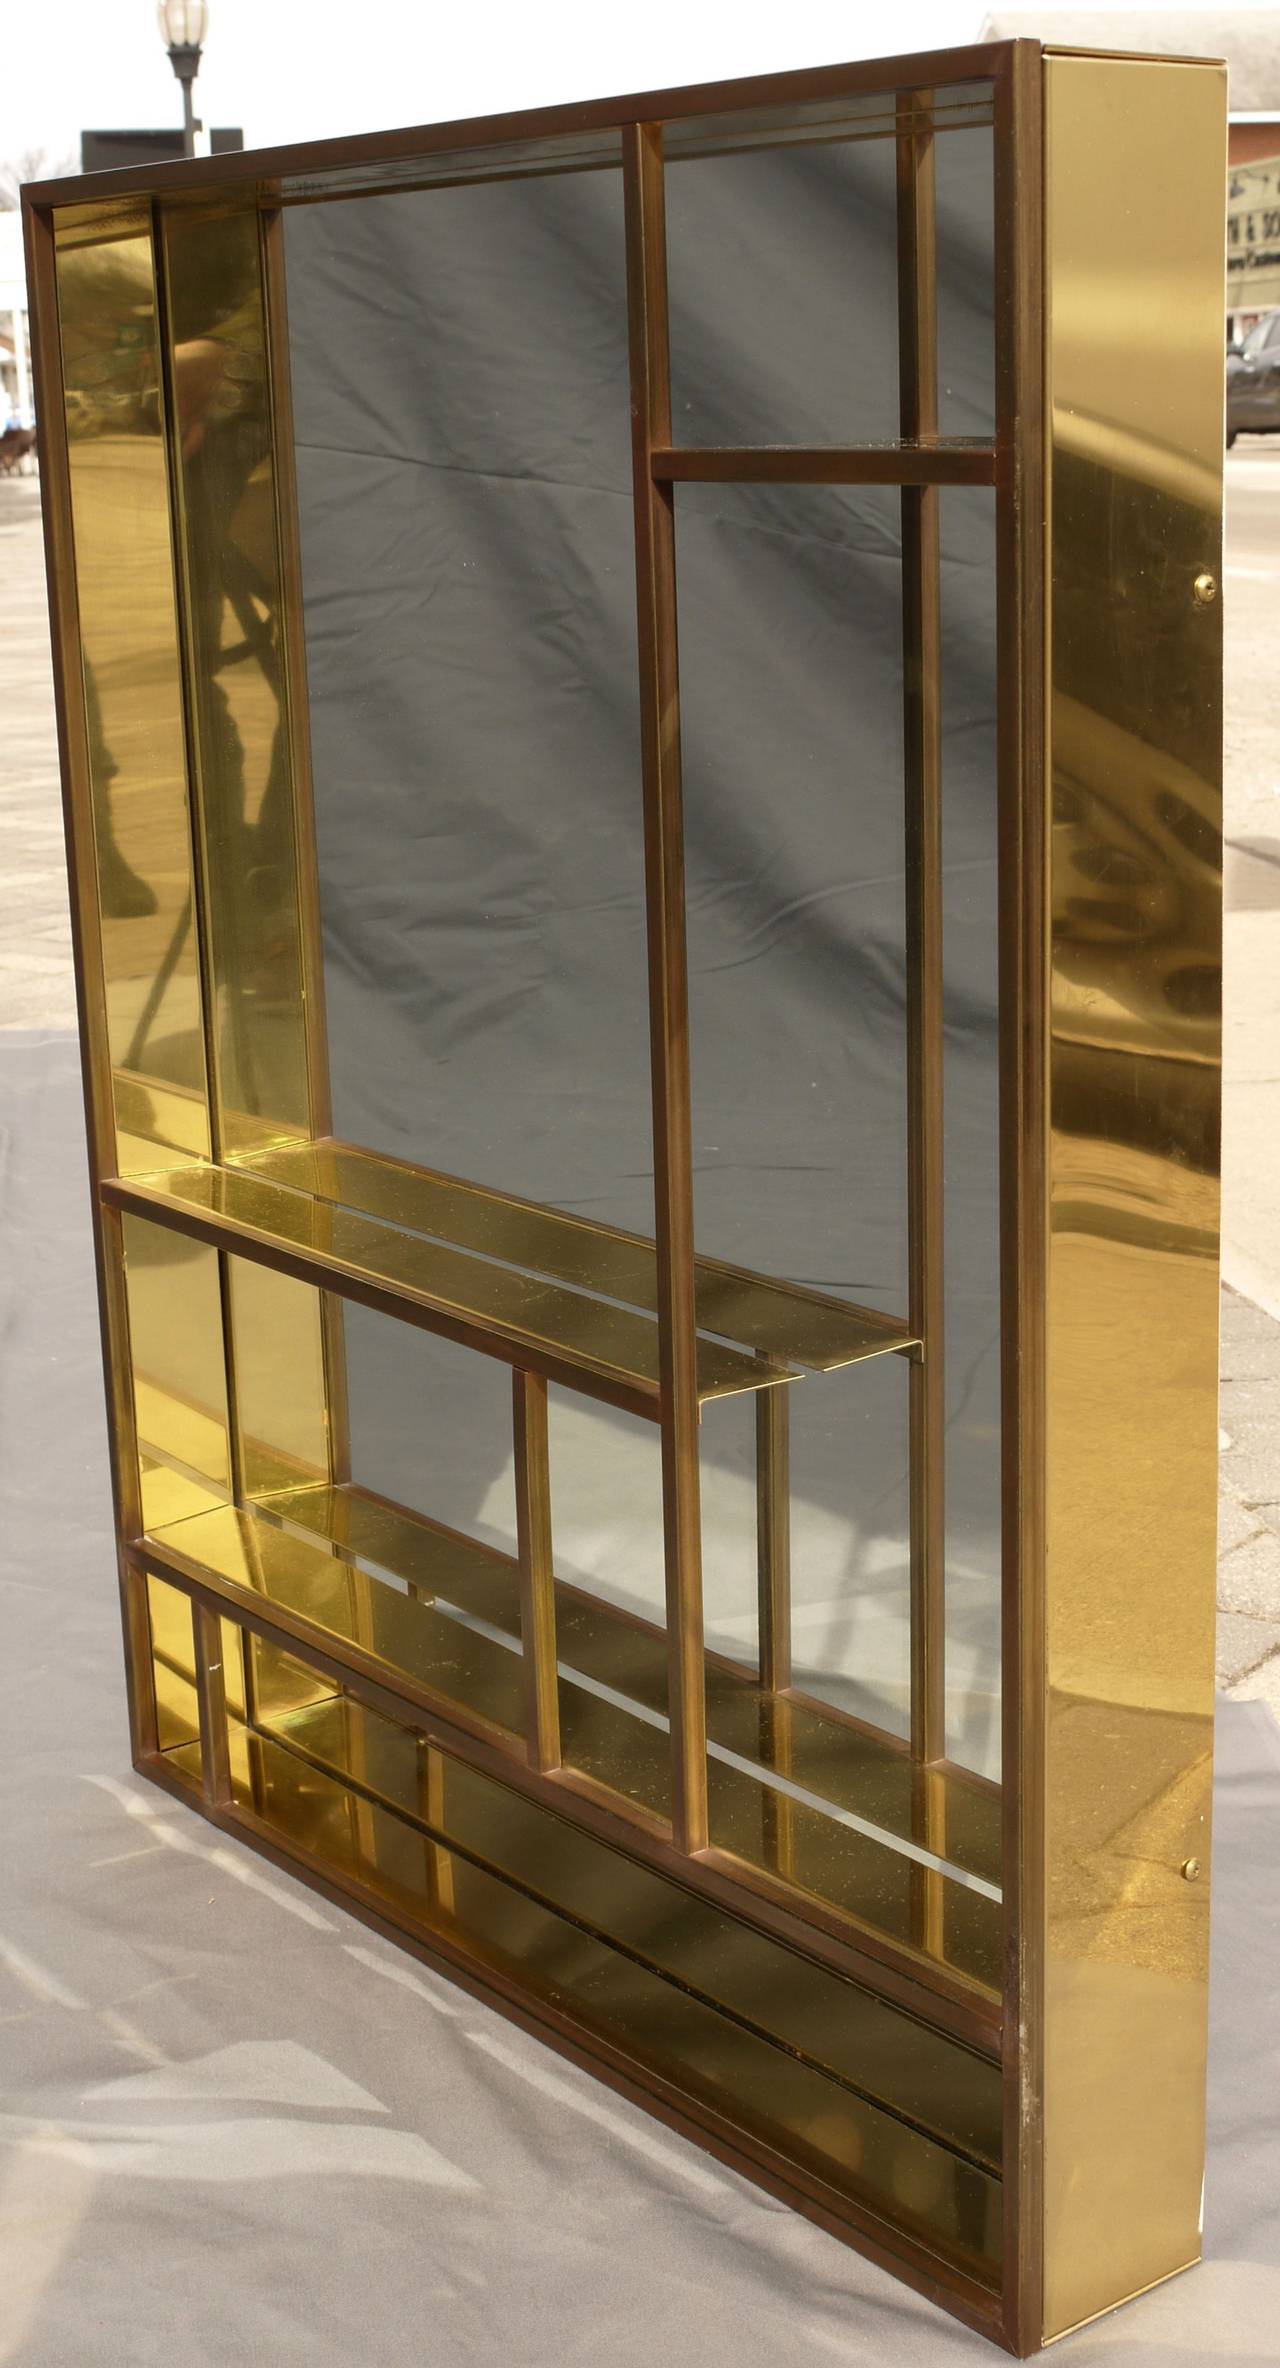 Architectural brass mirror or hanging curio shelf by Curtis Jere. Signed and dated 1979 on the right side vertical. This piece has a wonderful architectural form and the brass reflective accents only add to it's mondrian like appeal to the design.